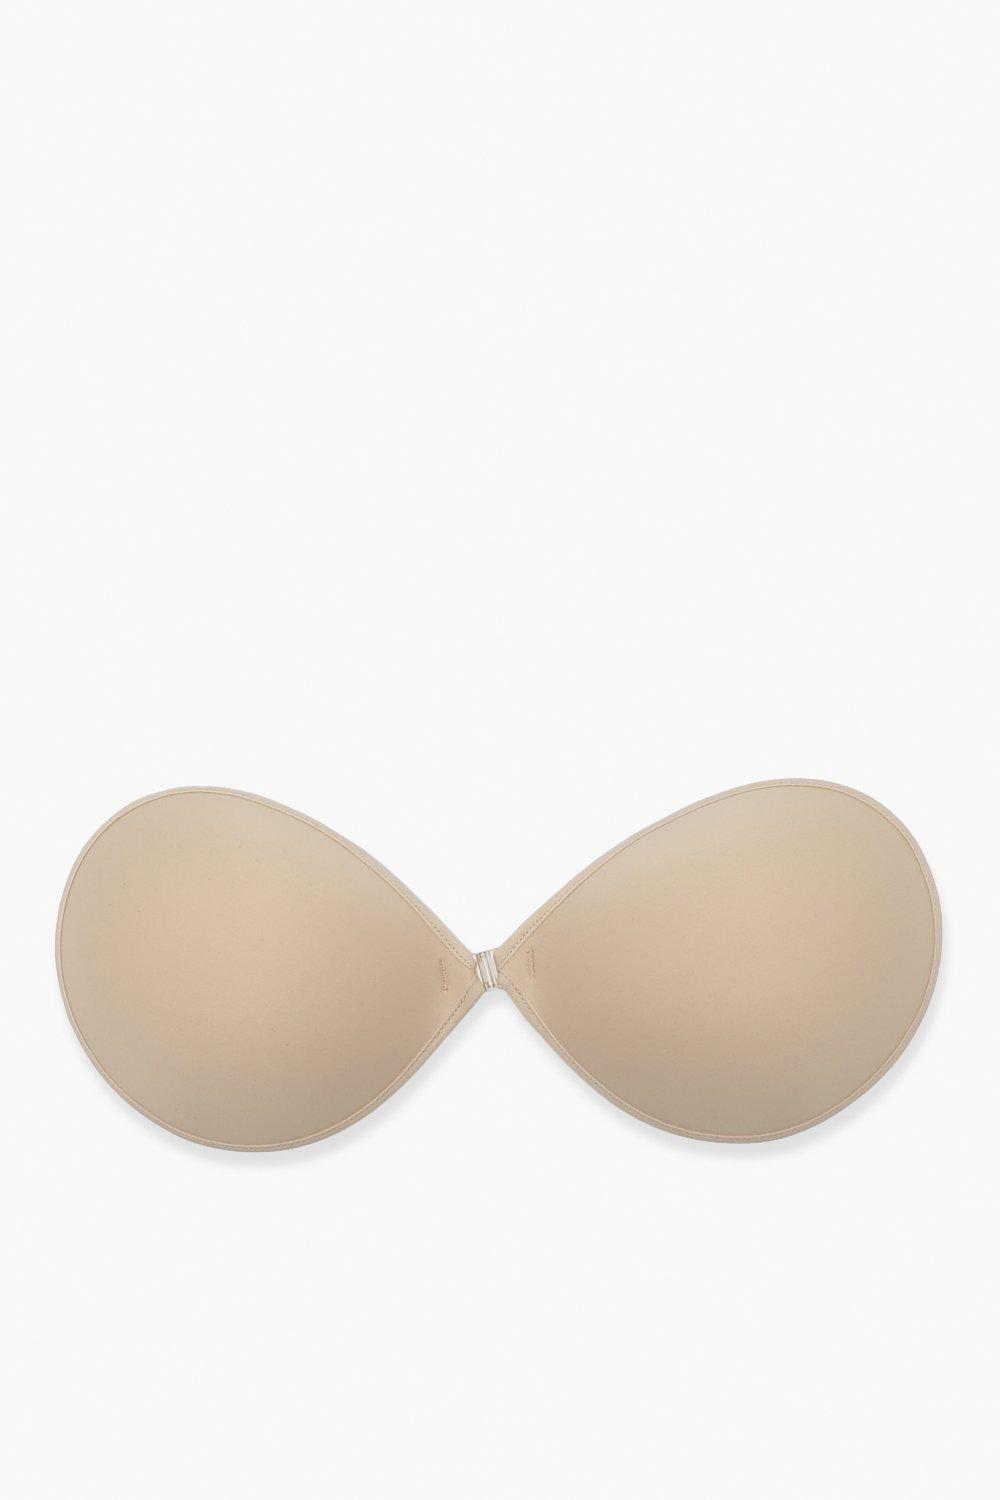 Stick-On Bras, Invisible & Lace